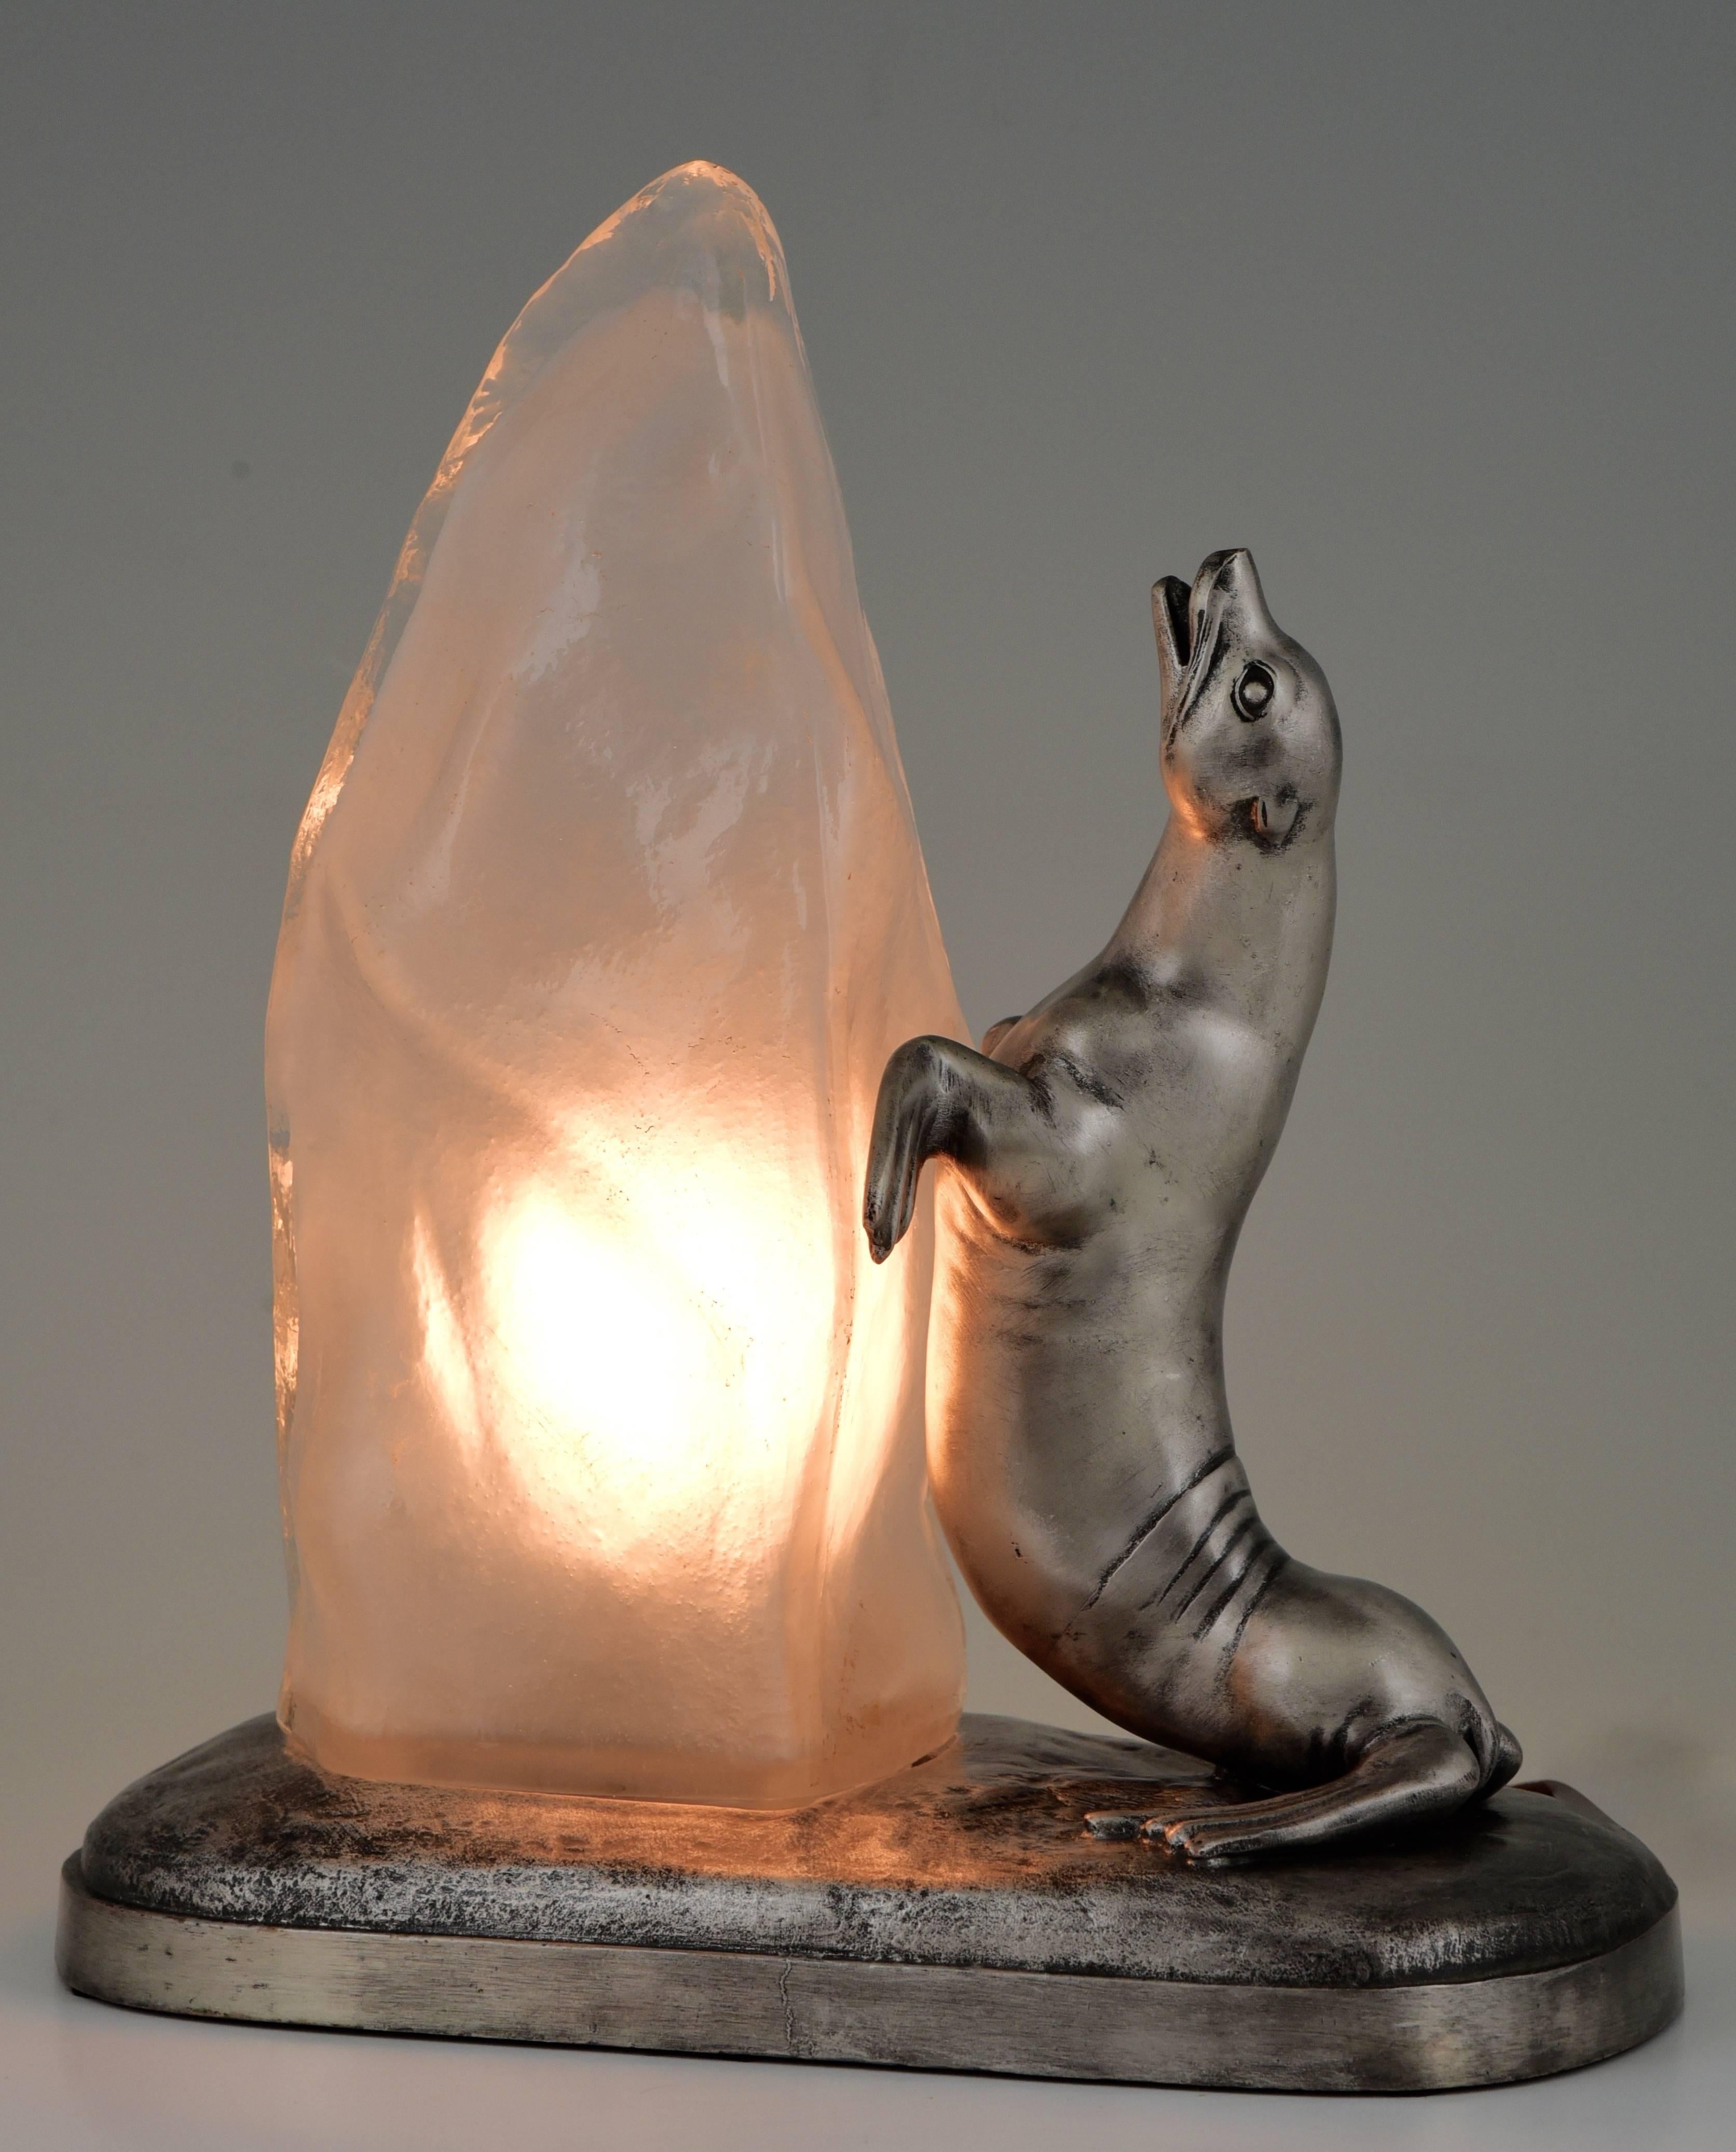 Adorable Art Deco lamp with a seal. The glass lampshade is modelled as a block of ice. Artist/ Maker: Louis Albert Carvin. Signature/ Marks: Foundry seal. Style: Art Deco. Date: 1930. Material: Art metal with silver patina and glass. Origin: France.